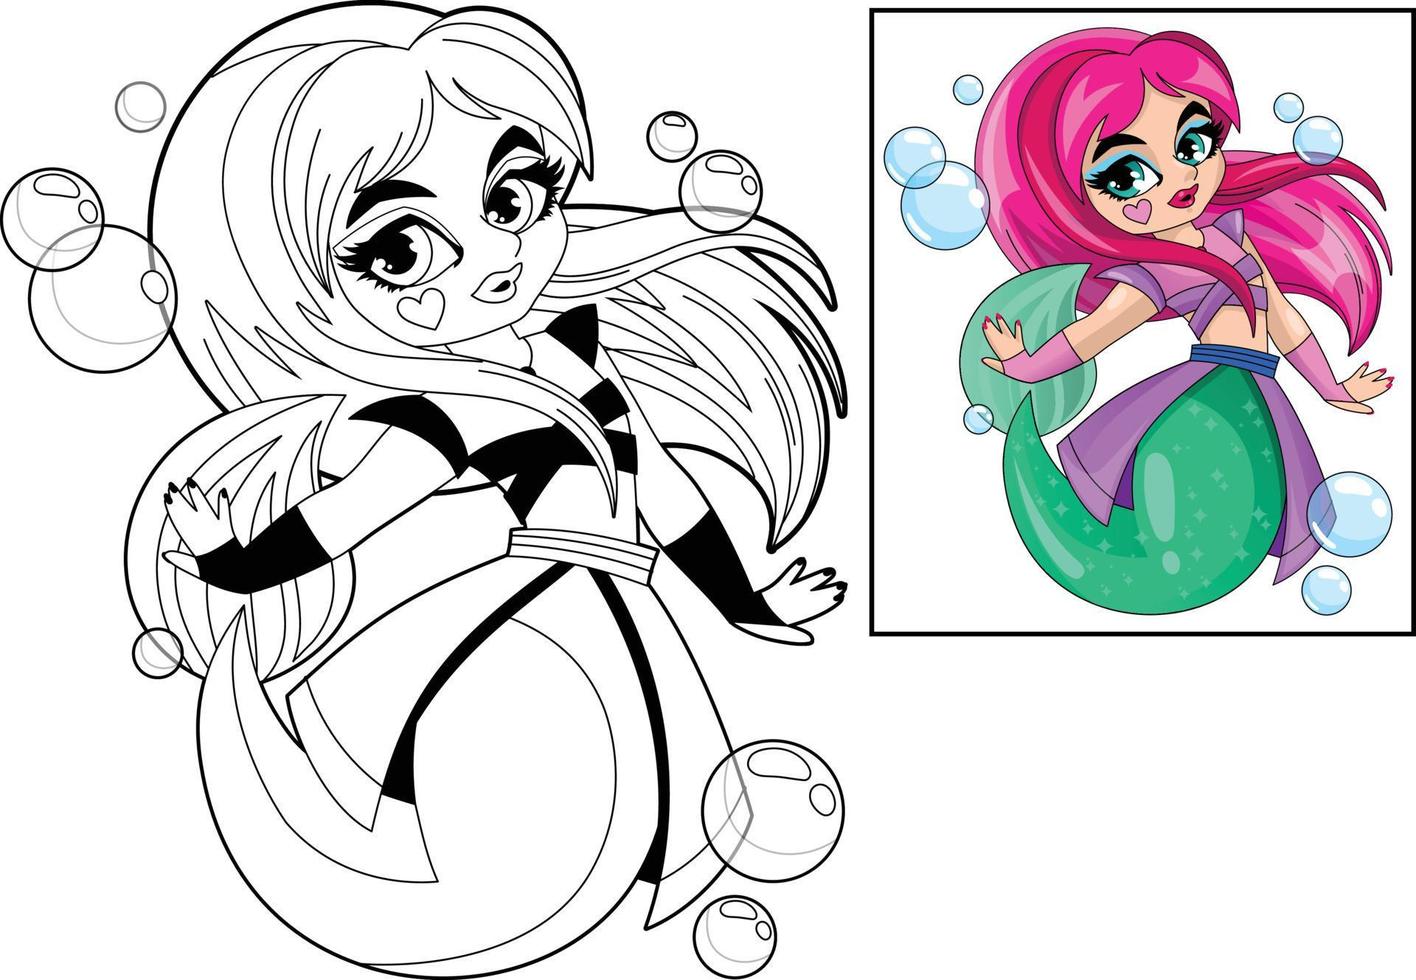 Little cute mermaid girl in an unusual fashionable costume. Children's coloring book. vector